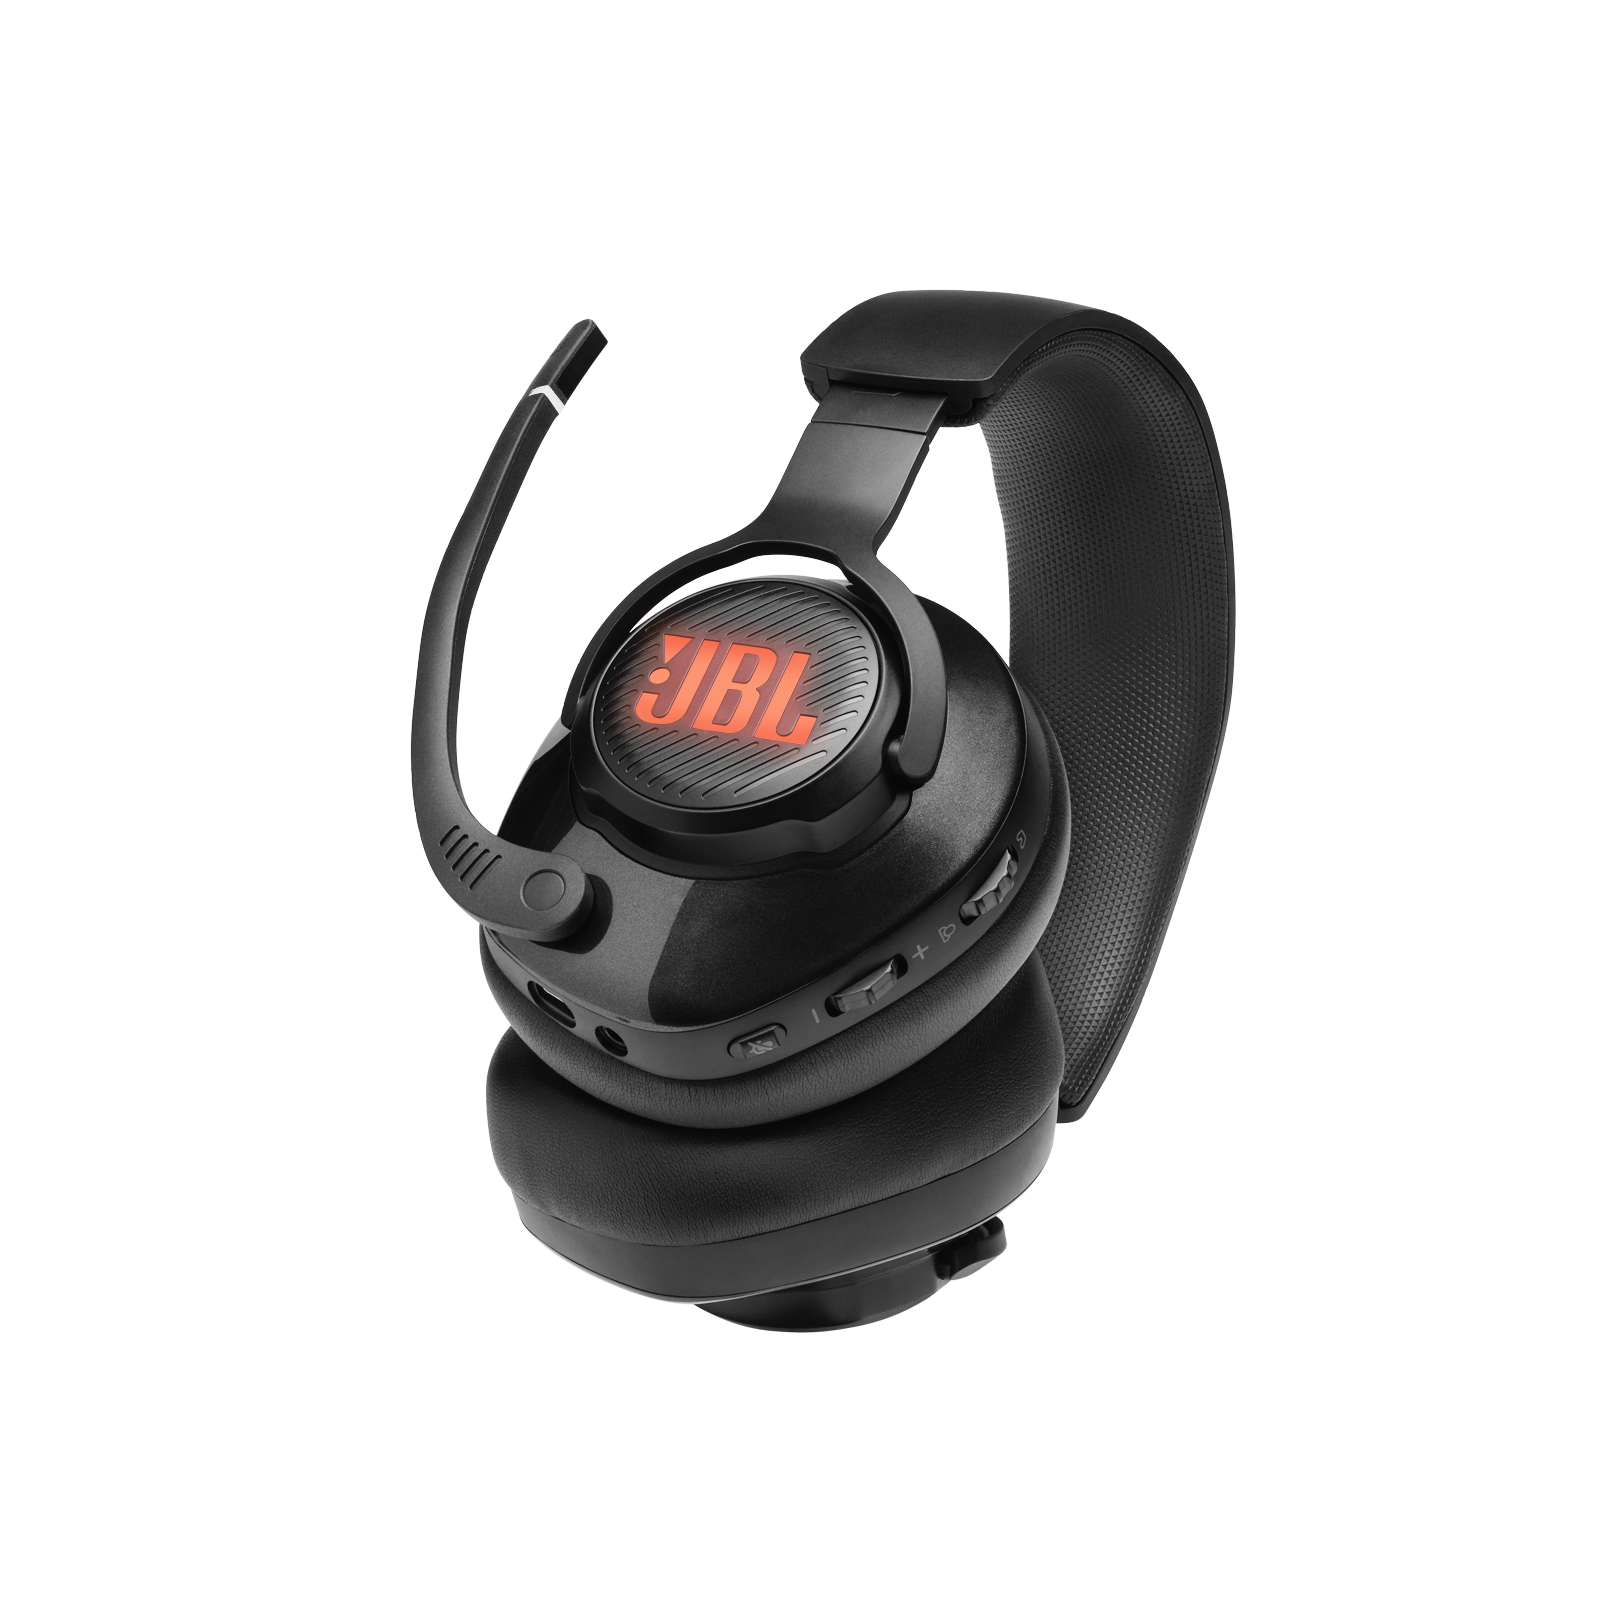 JBL Quantum 400 - Black - USB over-ear PC gaming headset with game-chat dial - Detailshot 4